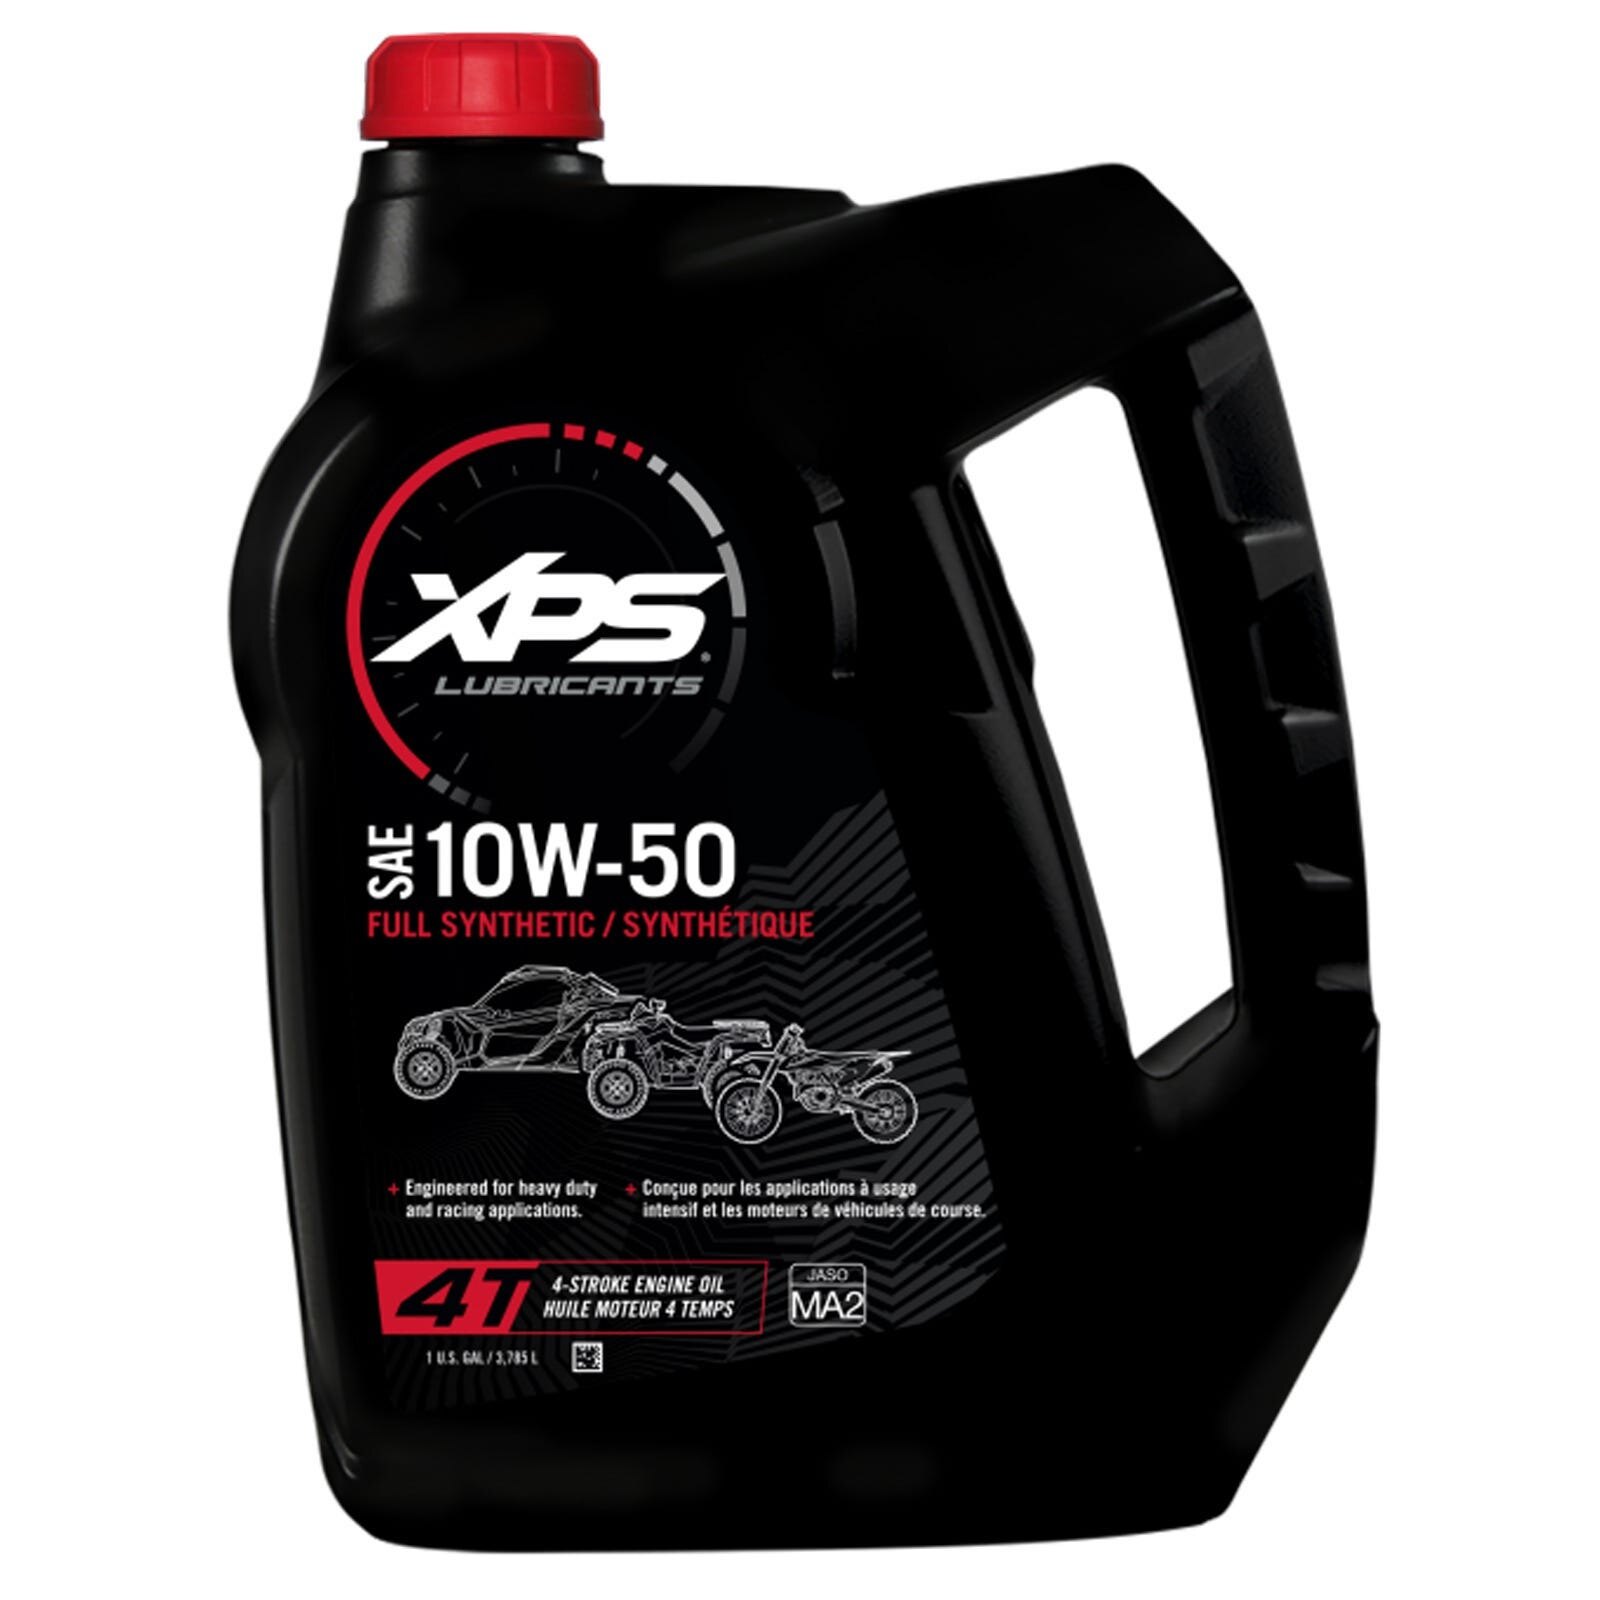 10W 50 Synthetic Premium 4 Stroke Engine Oil 1 US gal.